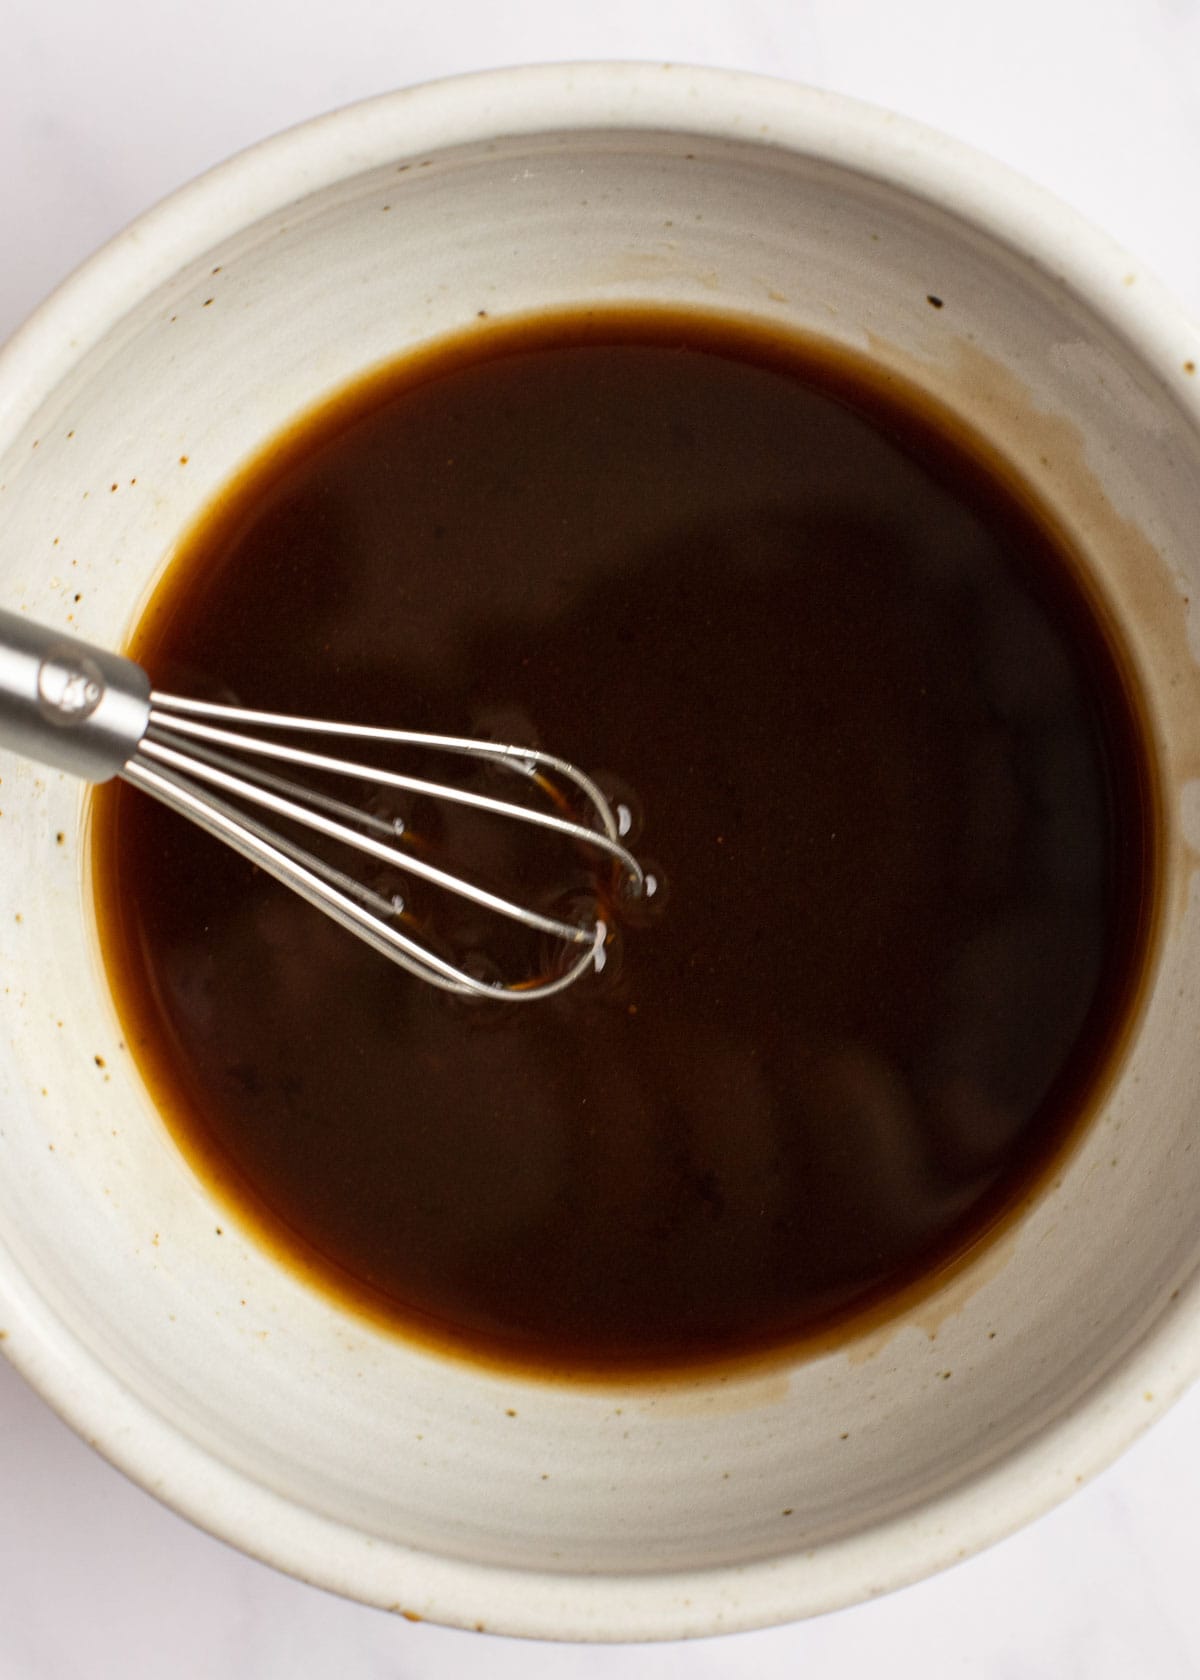 a keto sauce made with soy sauce, fish sauce, oyster sauce, monk fruit, and water